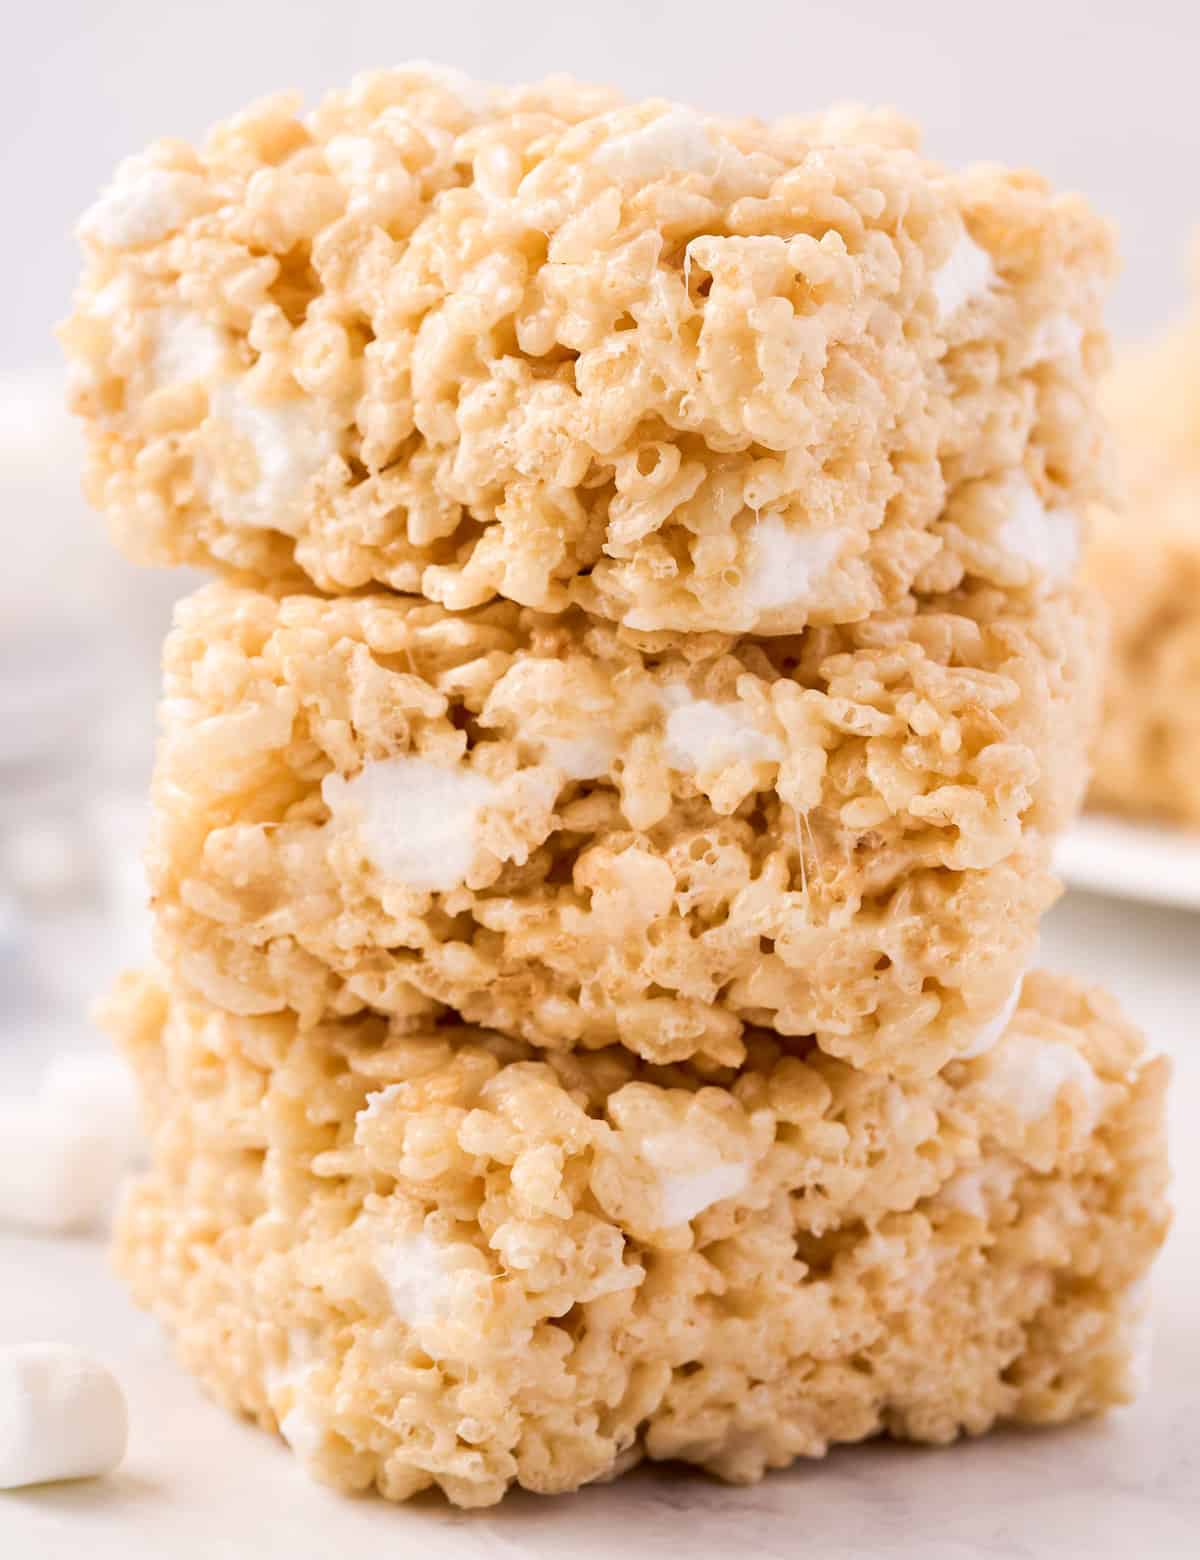 Chocolate Dipped Rice Krispie Treats - Family Fresh Meals